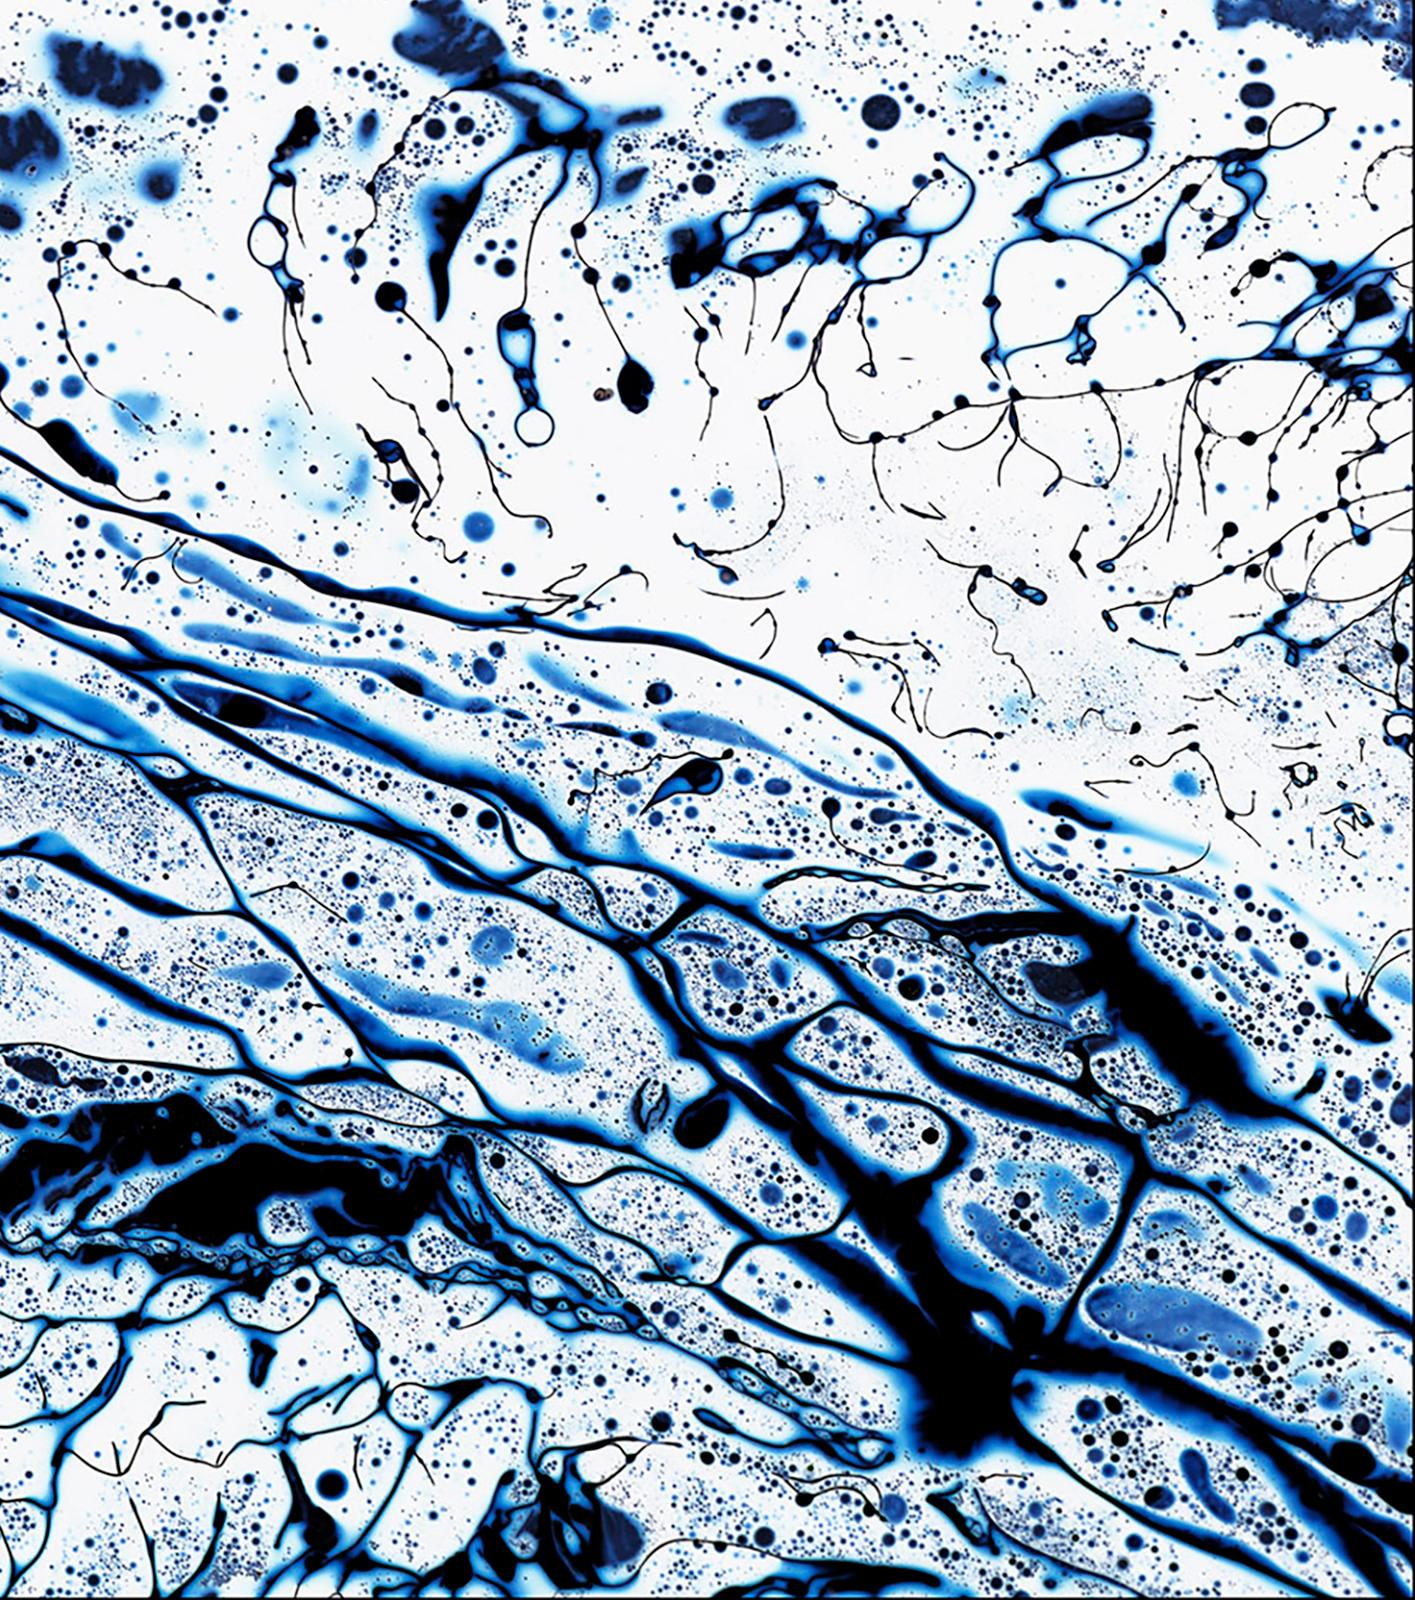 Fluidity 3-Signed limited edition abstract fine art print, large color photo, Blue - Photograph by Michael Banks